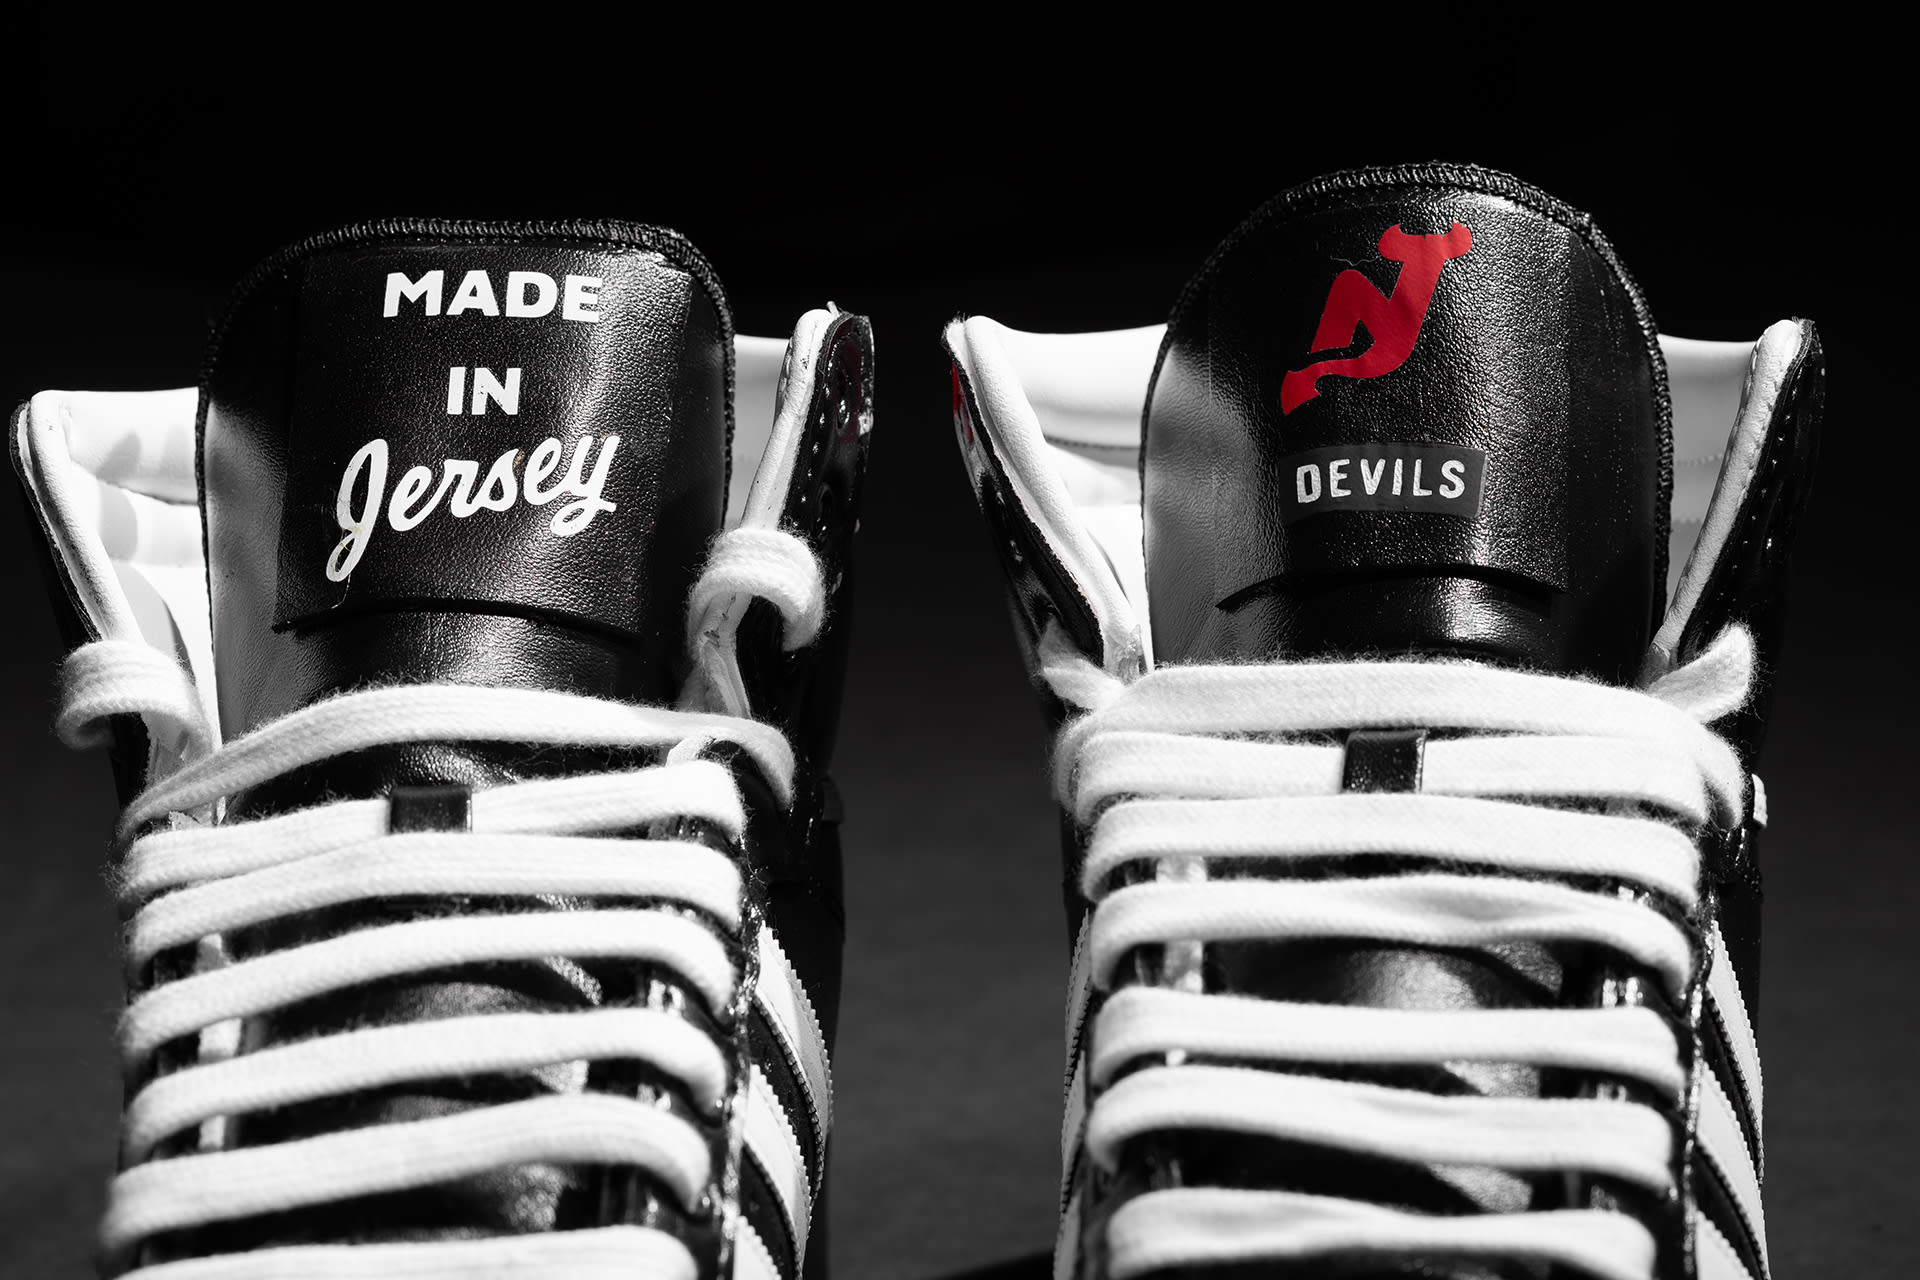 New Jersey Devils Third Jersey Leak was Real, Involved Martin